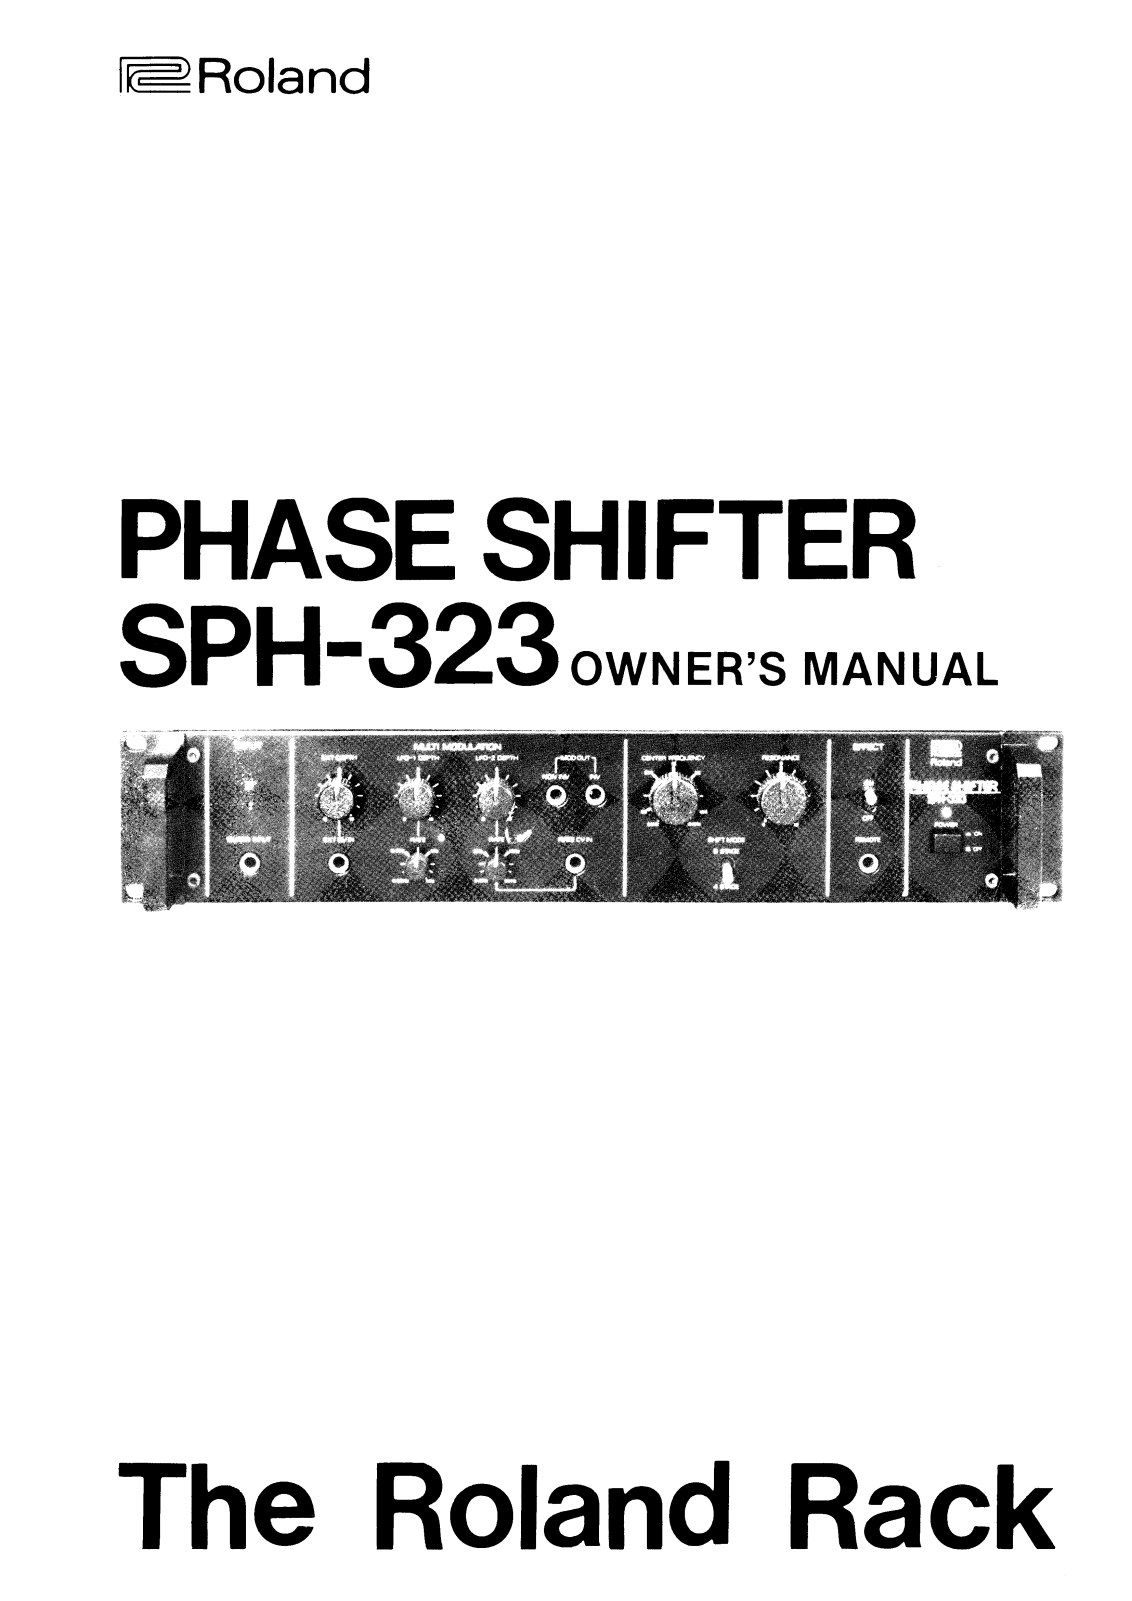 Roland SPH-323 User Manual